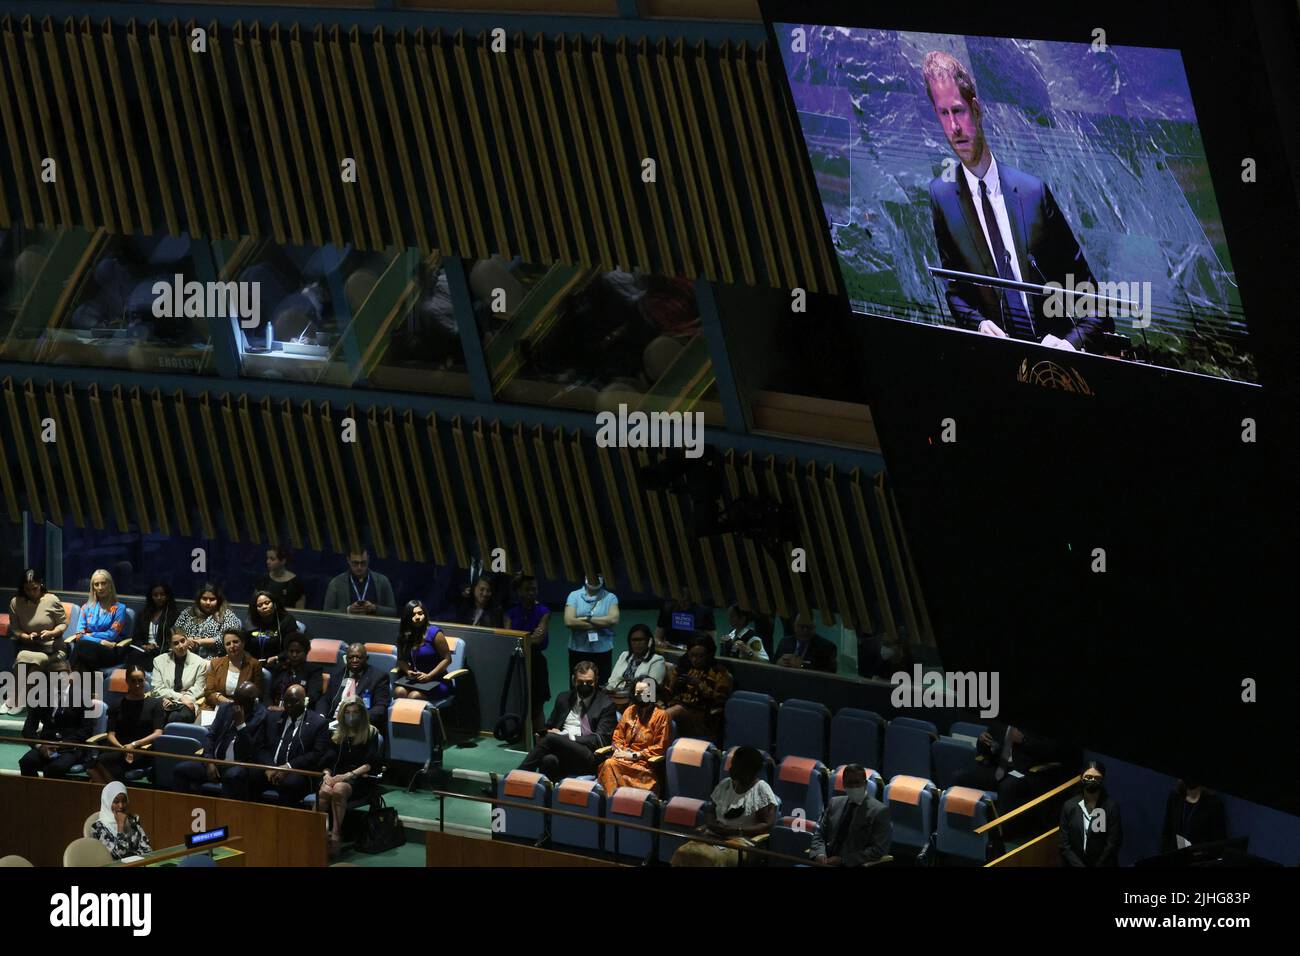 Britain's Prince Harry is seen on a screen as he addresses the United Nations General Assembly to celebrate Nelson Mandela International Day at the United Nations Headquarters in New York, U.S., July 18, 2022. REUTERS/Shannon Stapleton Stock Photo